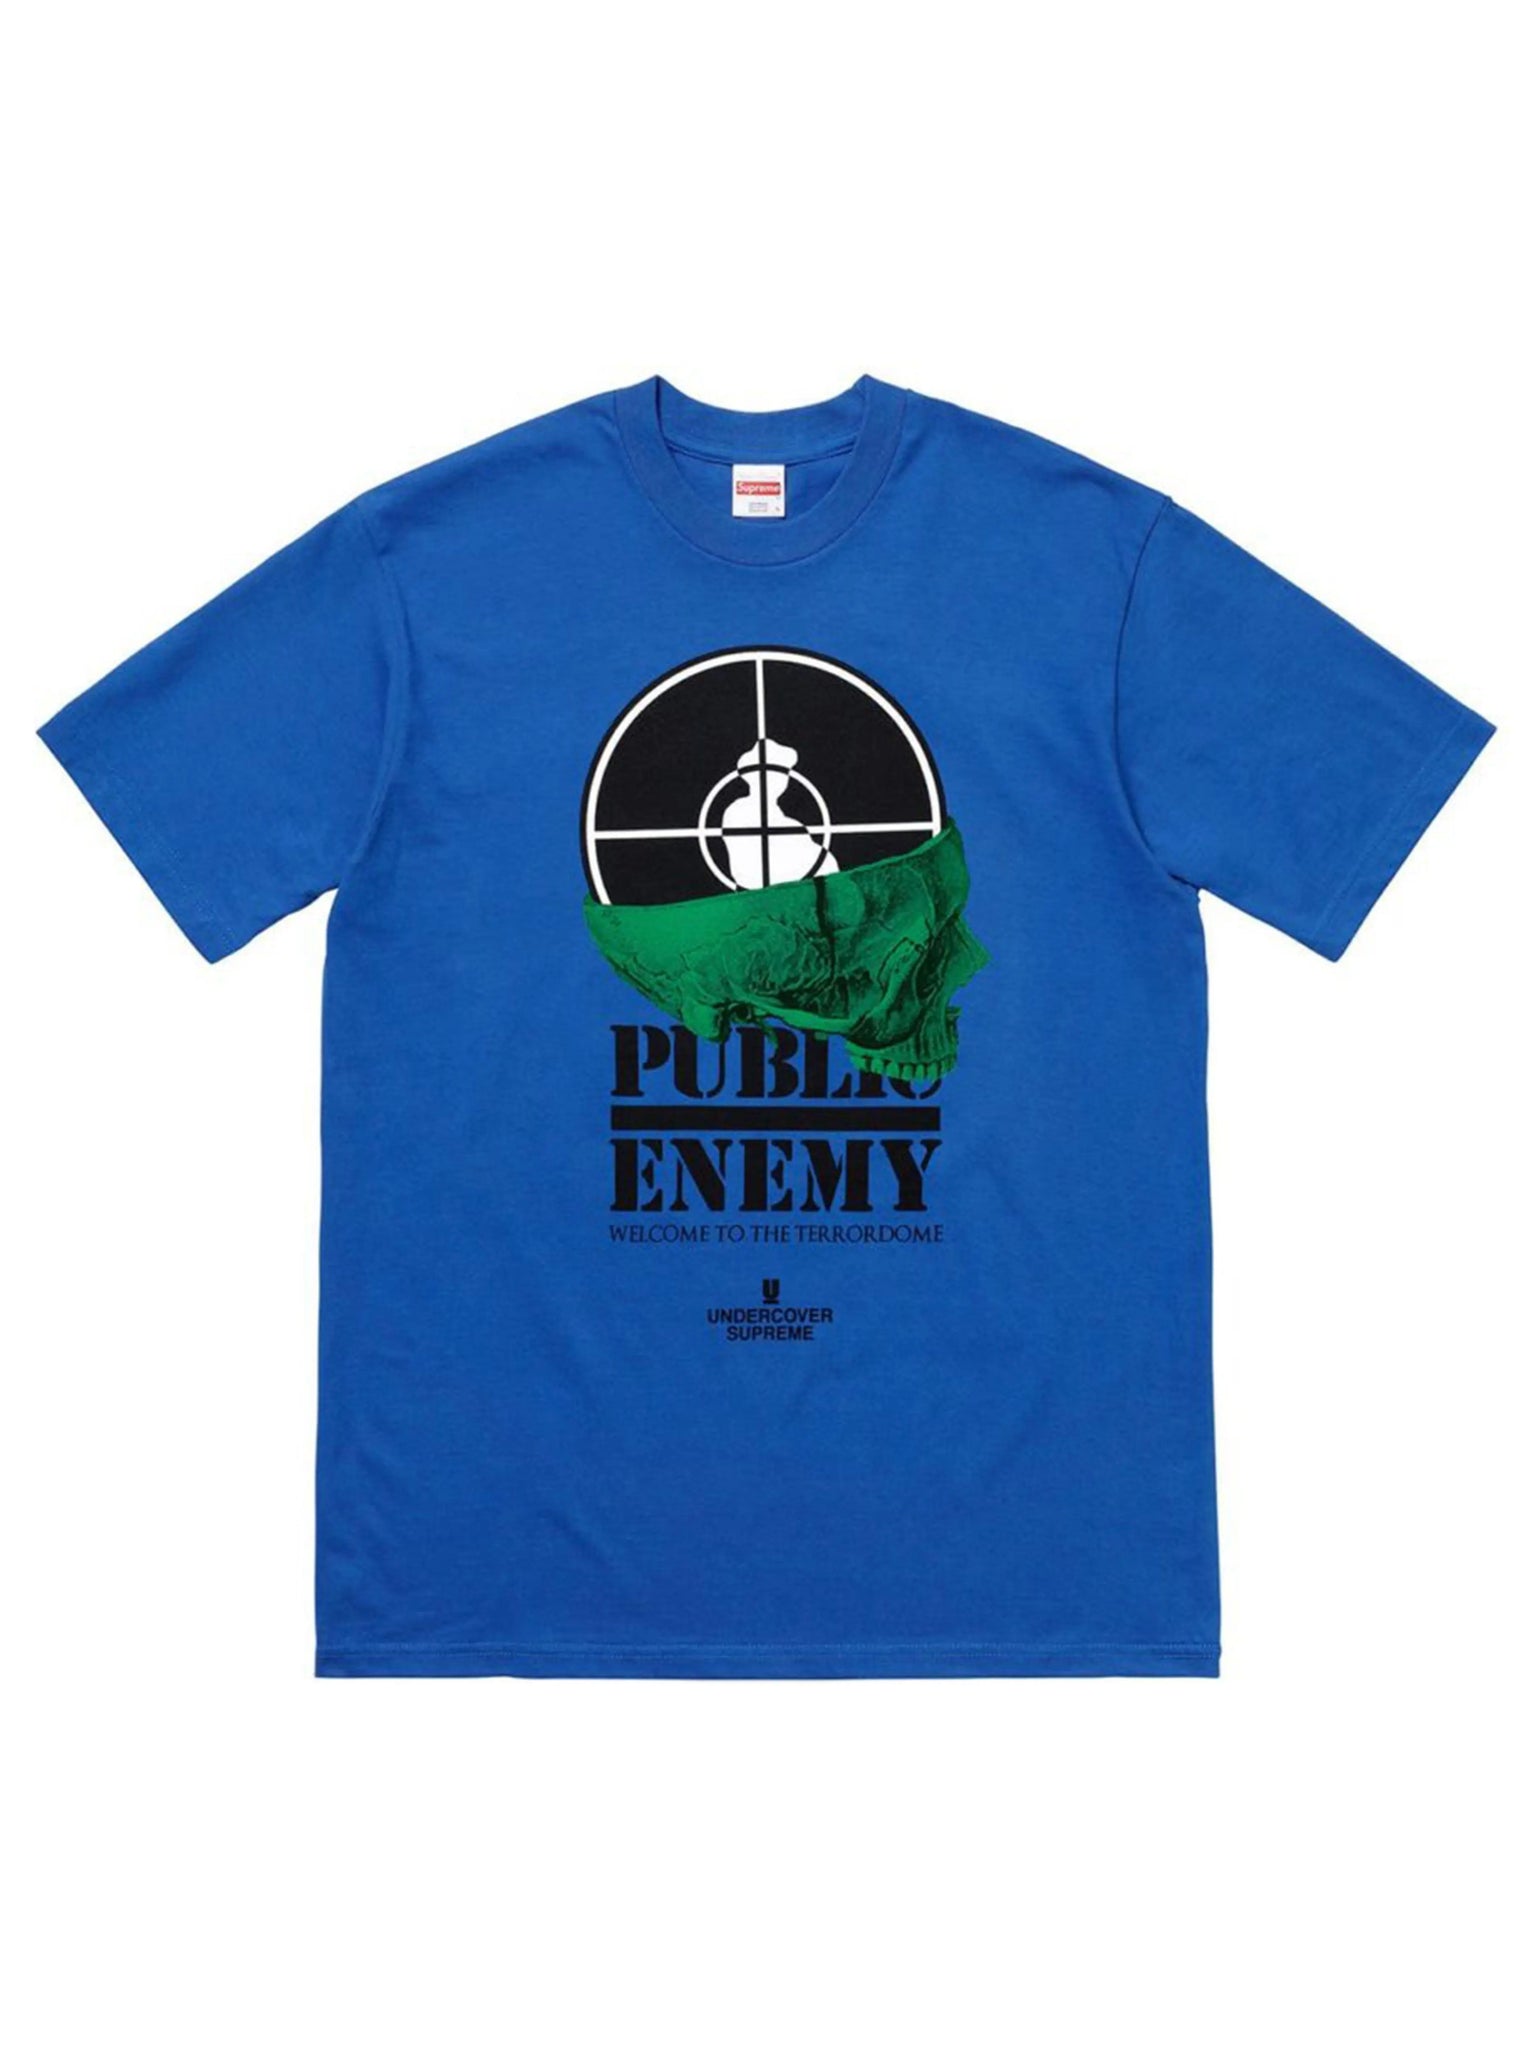 Supreme X UNDERCOVER/Public Enemy Terrordome Tee Royal Blue [SS18] Prior